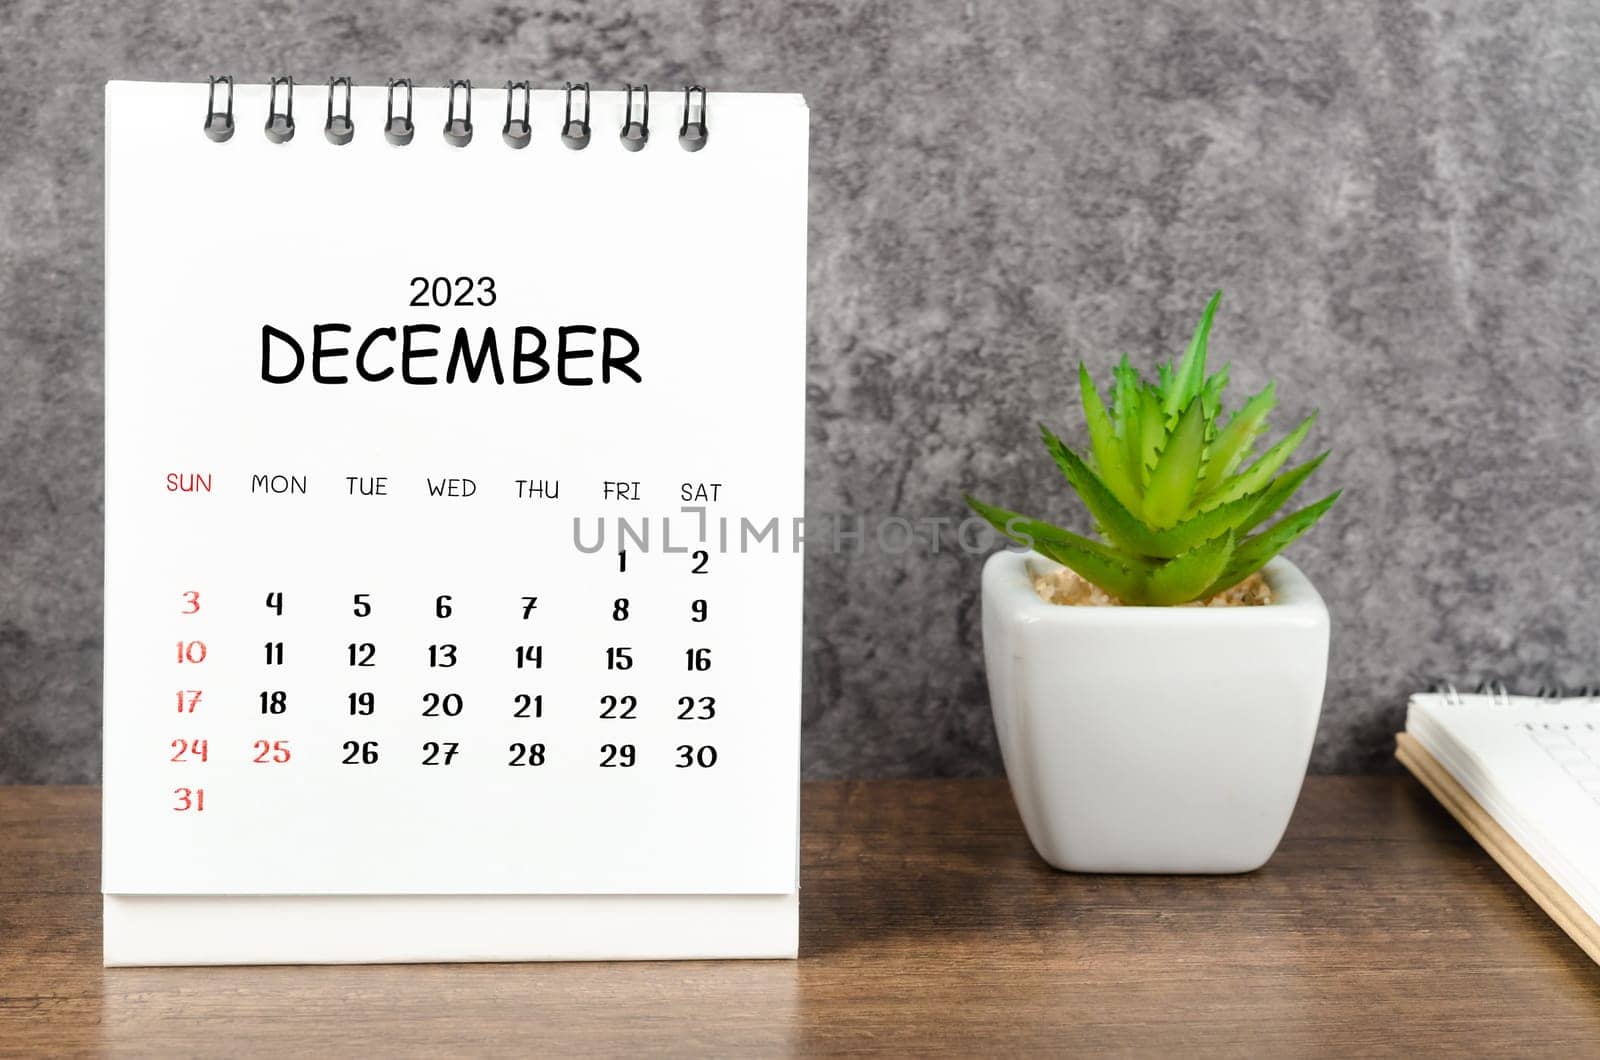 The December 2023 Monthly desk calendar for 2023 with diary on wooden table. by Gamjai